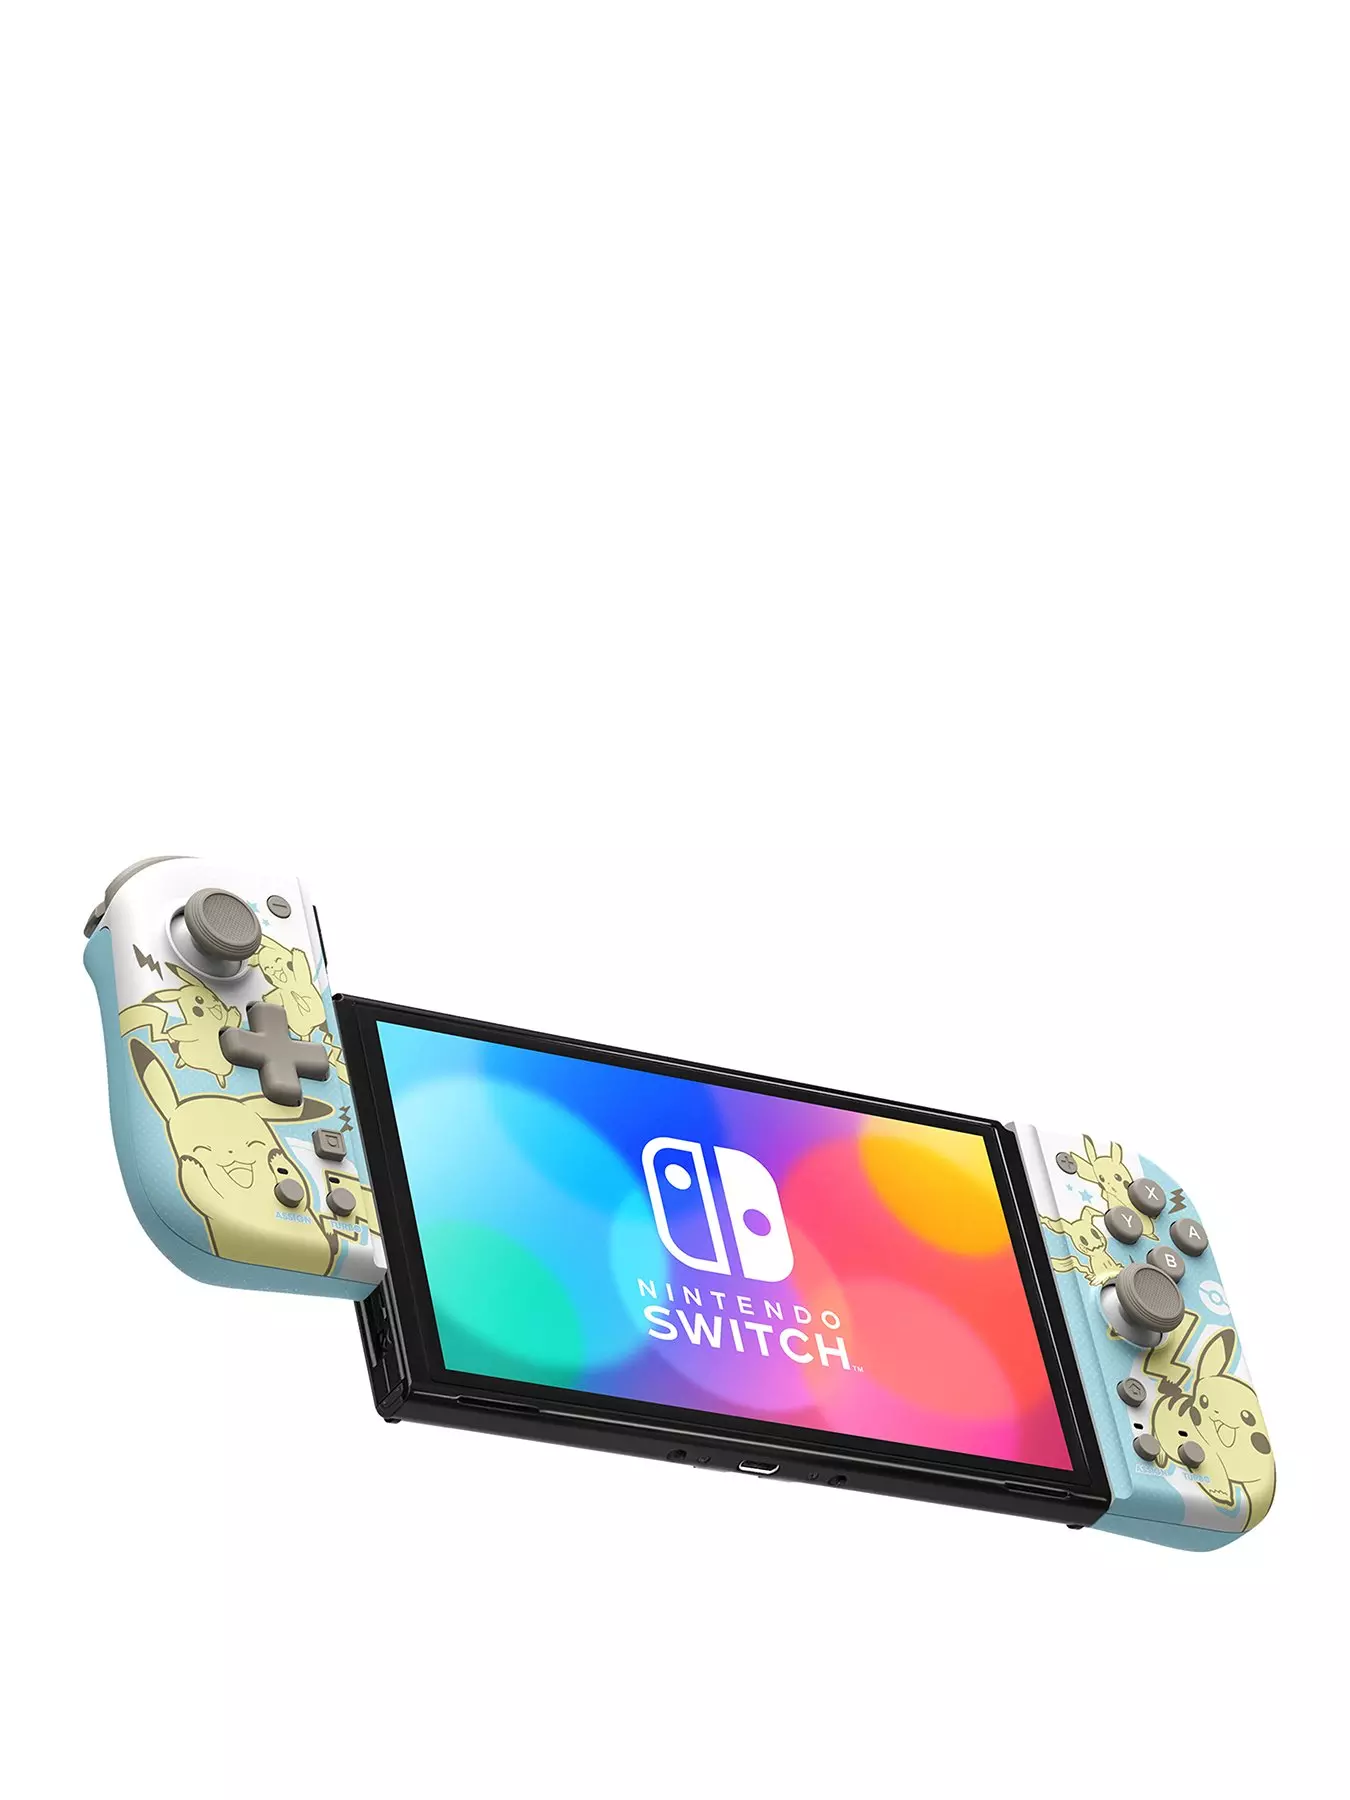 HORI Split Pad Compact Attachment Set (Eevee) for Nintendo Switch -  Officially Licensed By Nintendo and The Pokémon Company International